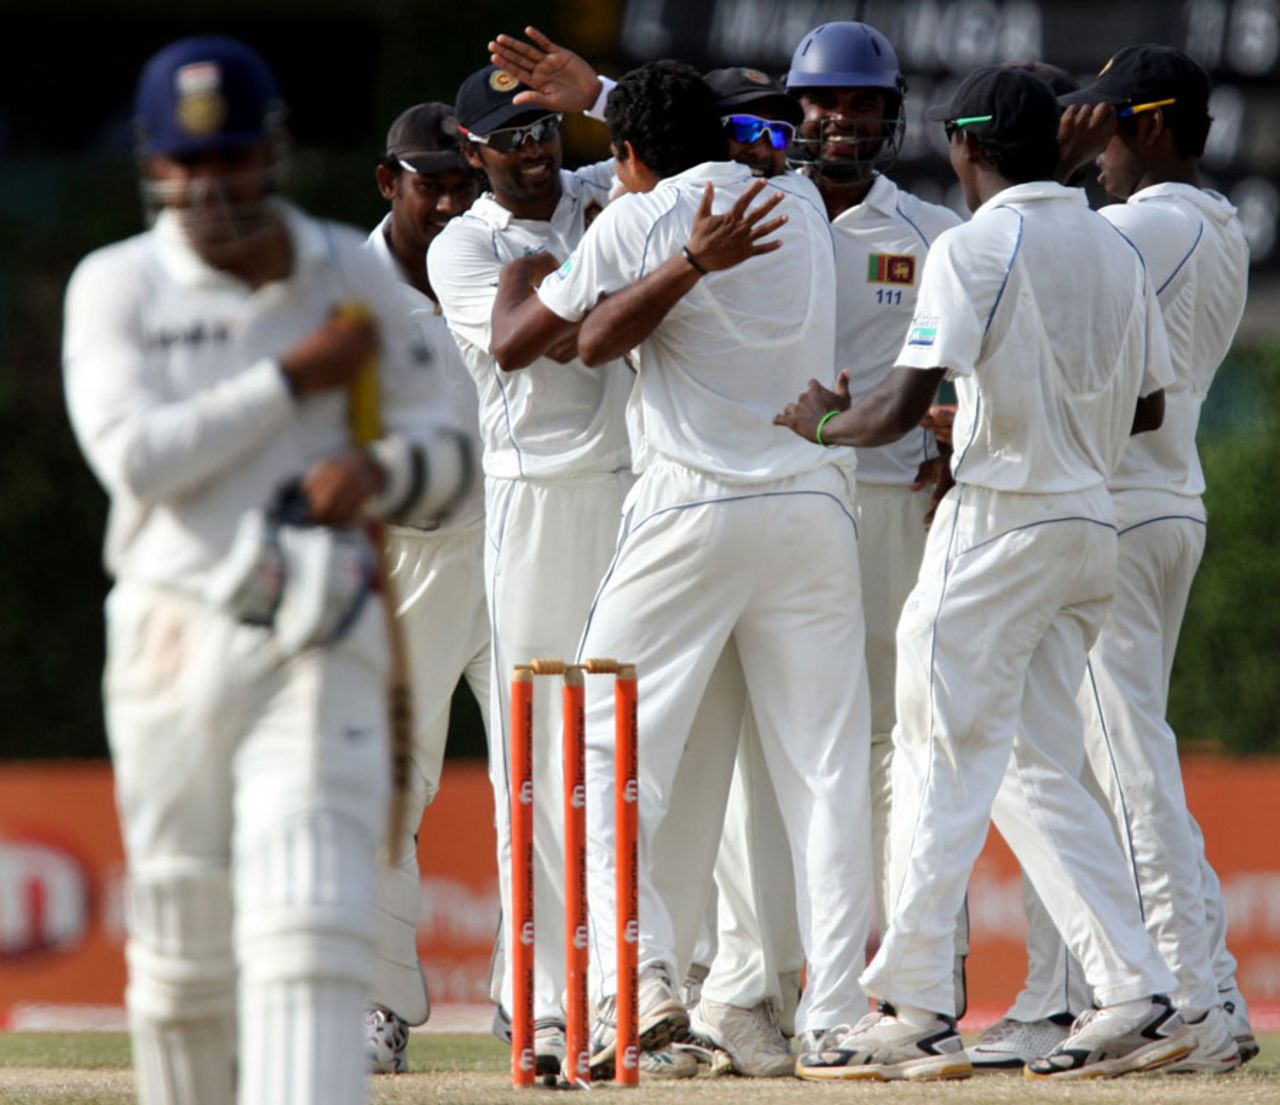 Suraj Randiv is mobbed by his teammates after getting Virender Sehwag for a duck, Sri Lanka v India, 3rd Test, P Sara Oval, 4th day, August 6, 2010